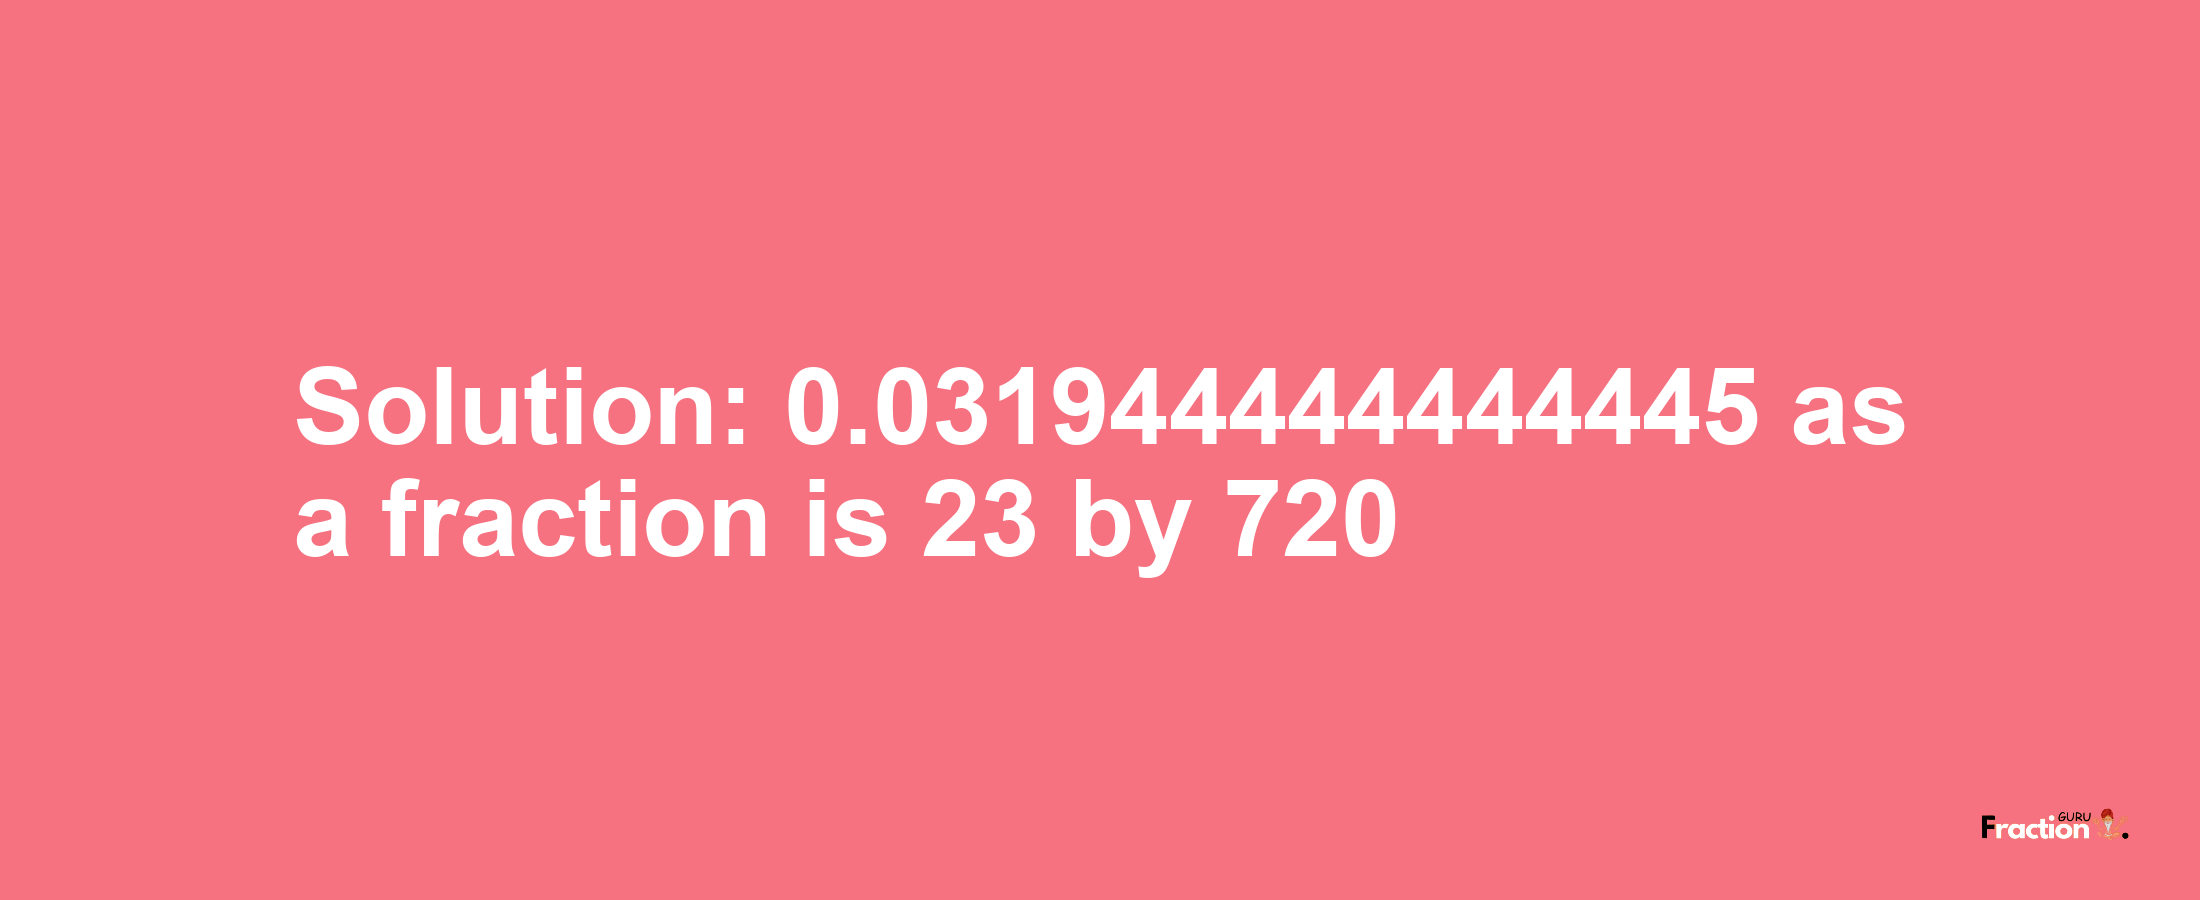 Solution:0.031944444444445 as a fraction is 23/720